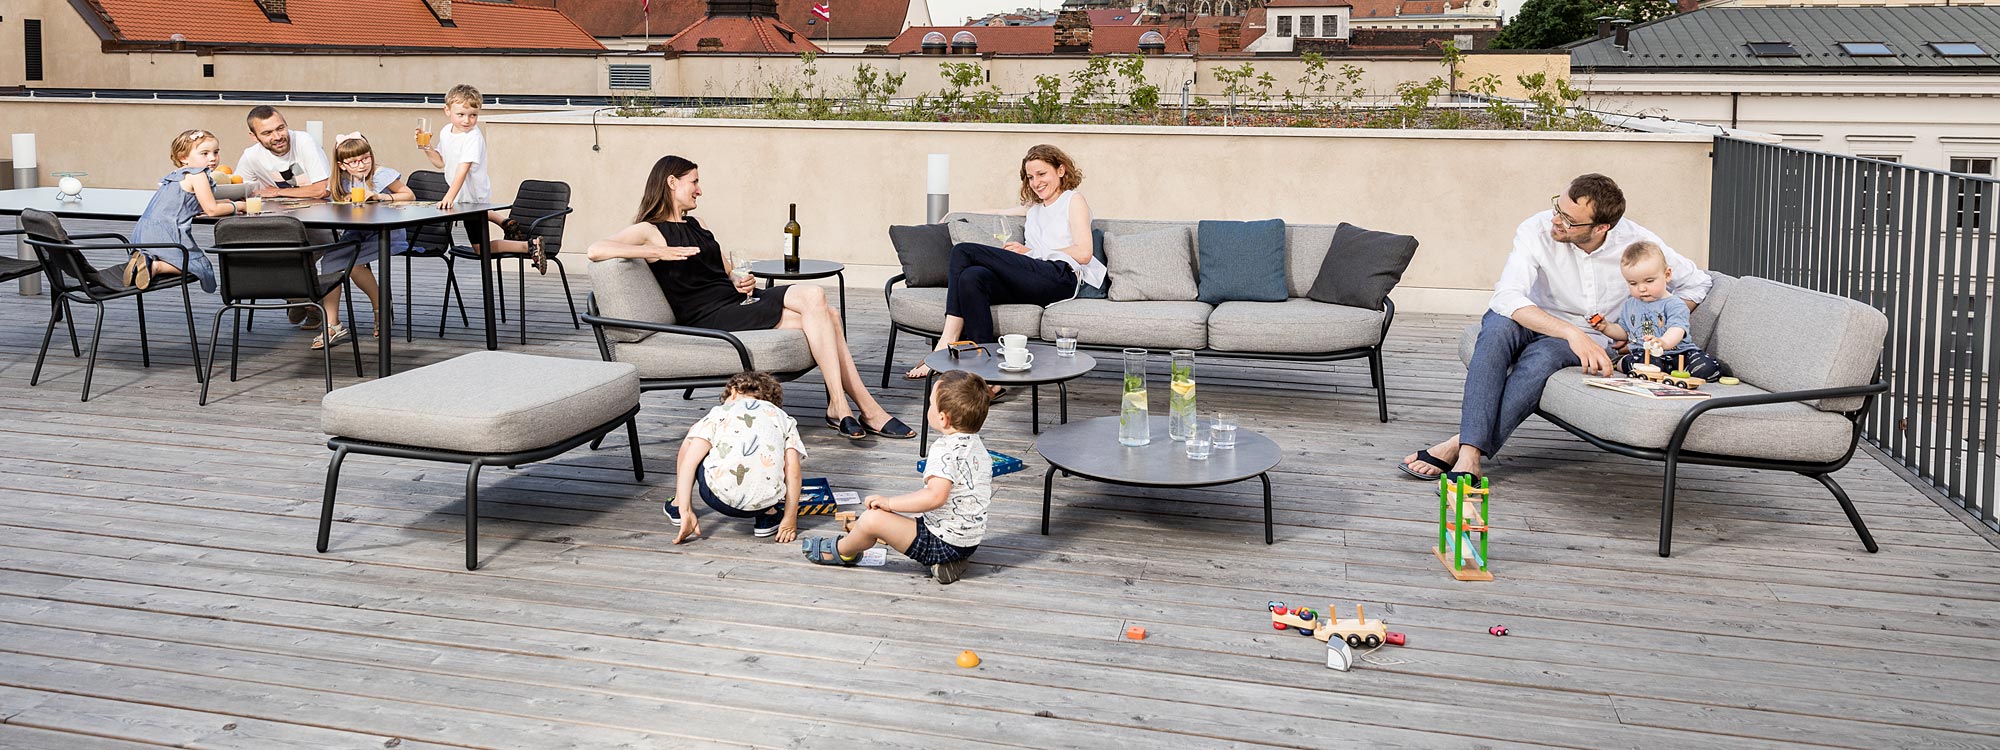 Image of young families relaxing on Starling garden sofas on rooftop terrace